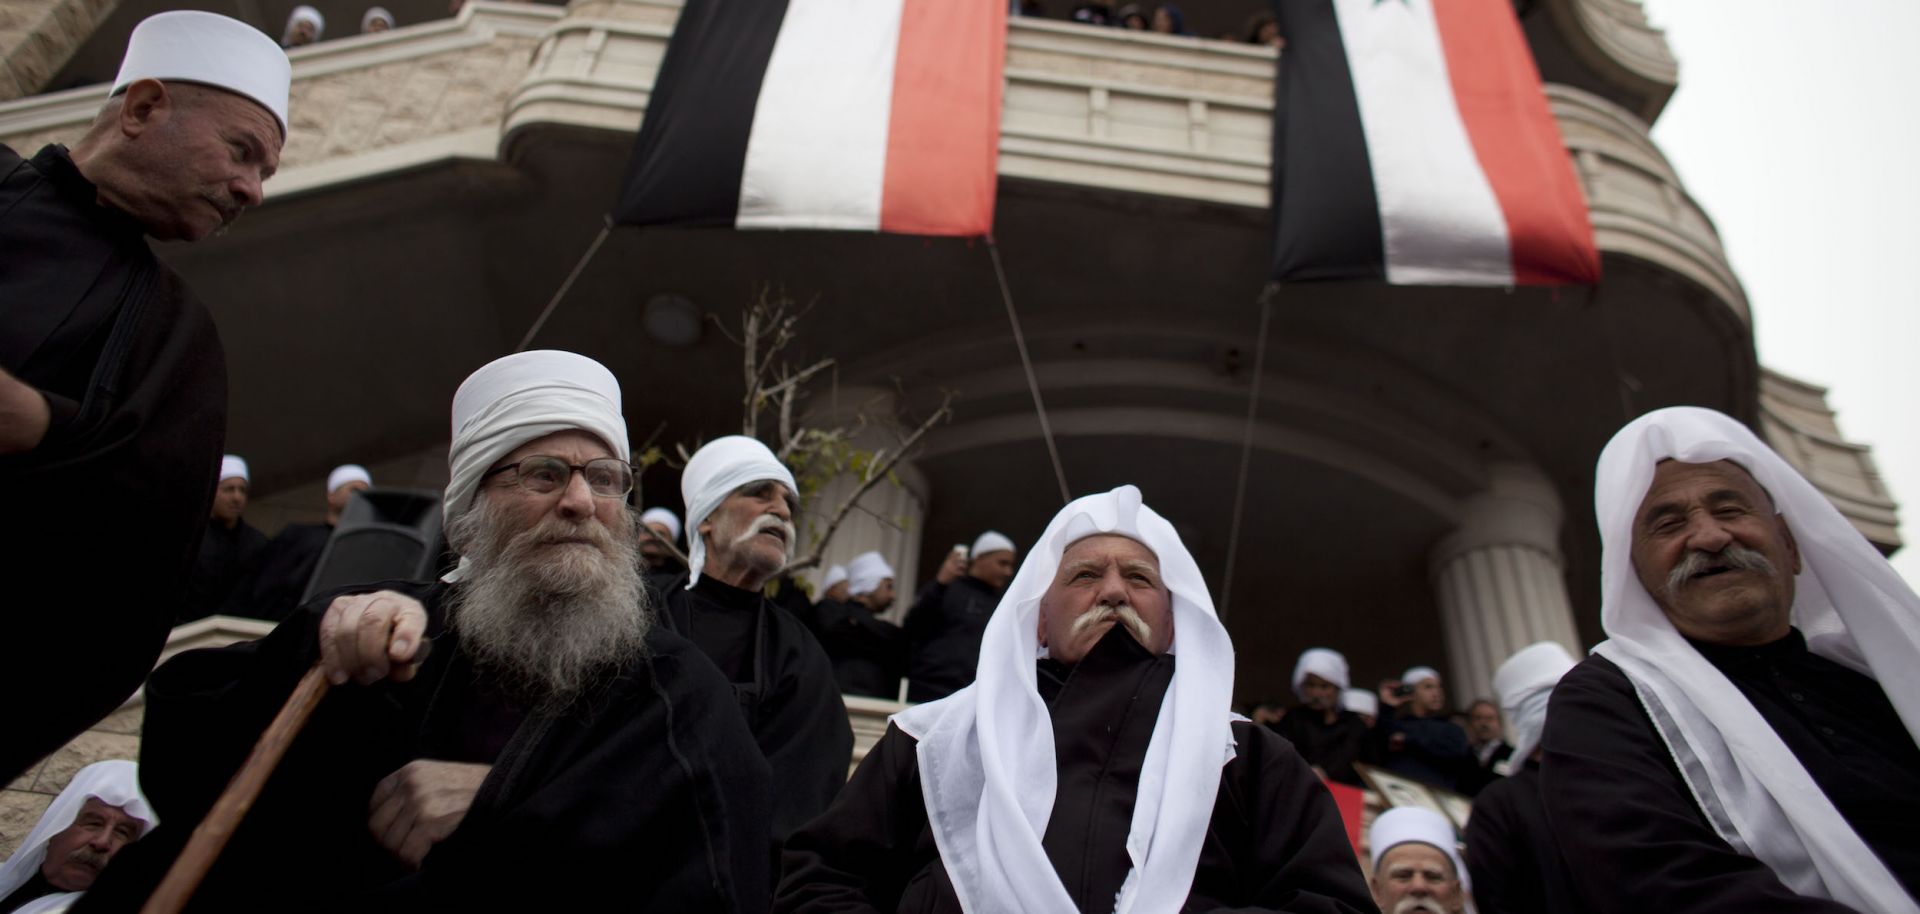 Druze men rally in support of the Syrian government in February 2012 in Majdal Shams, a Druze town on the Israeli-controlled side of the Golan Heights.